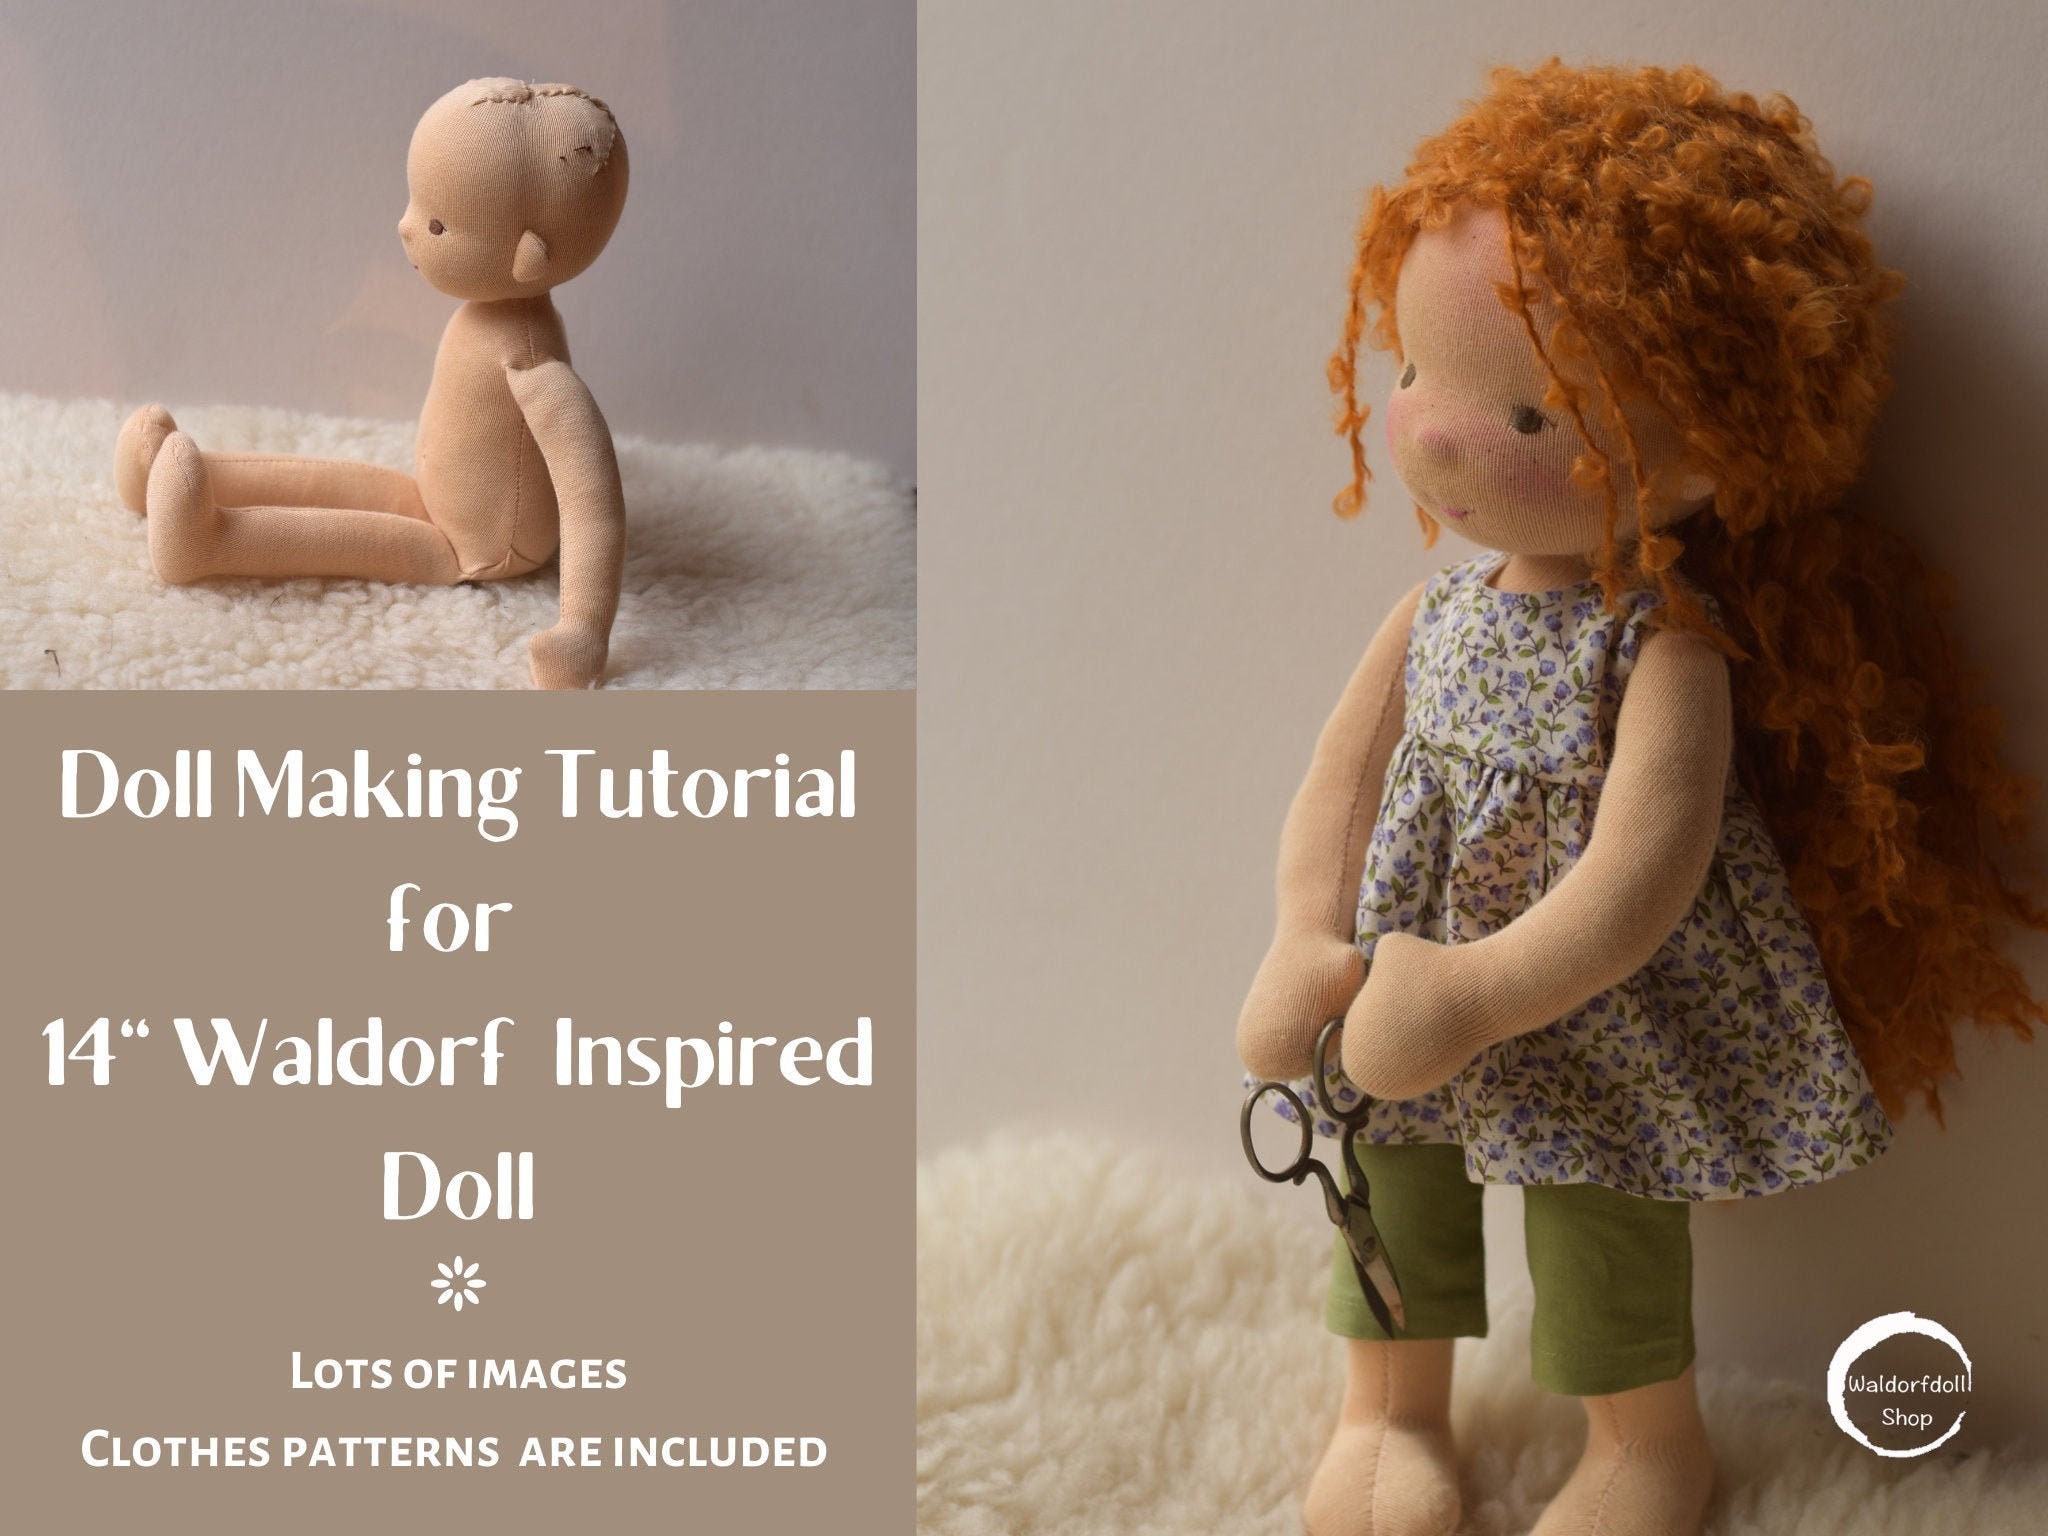 WALDORF HANDMADE TOYS: Table puppets - WALDORF (inspired) MOMS